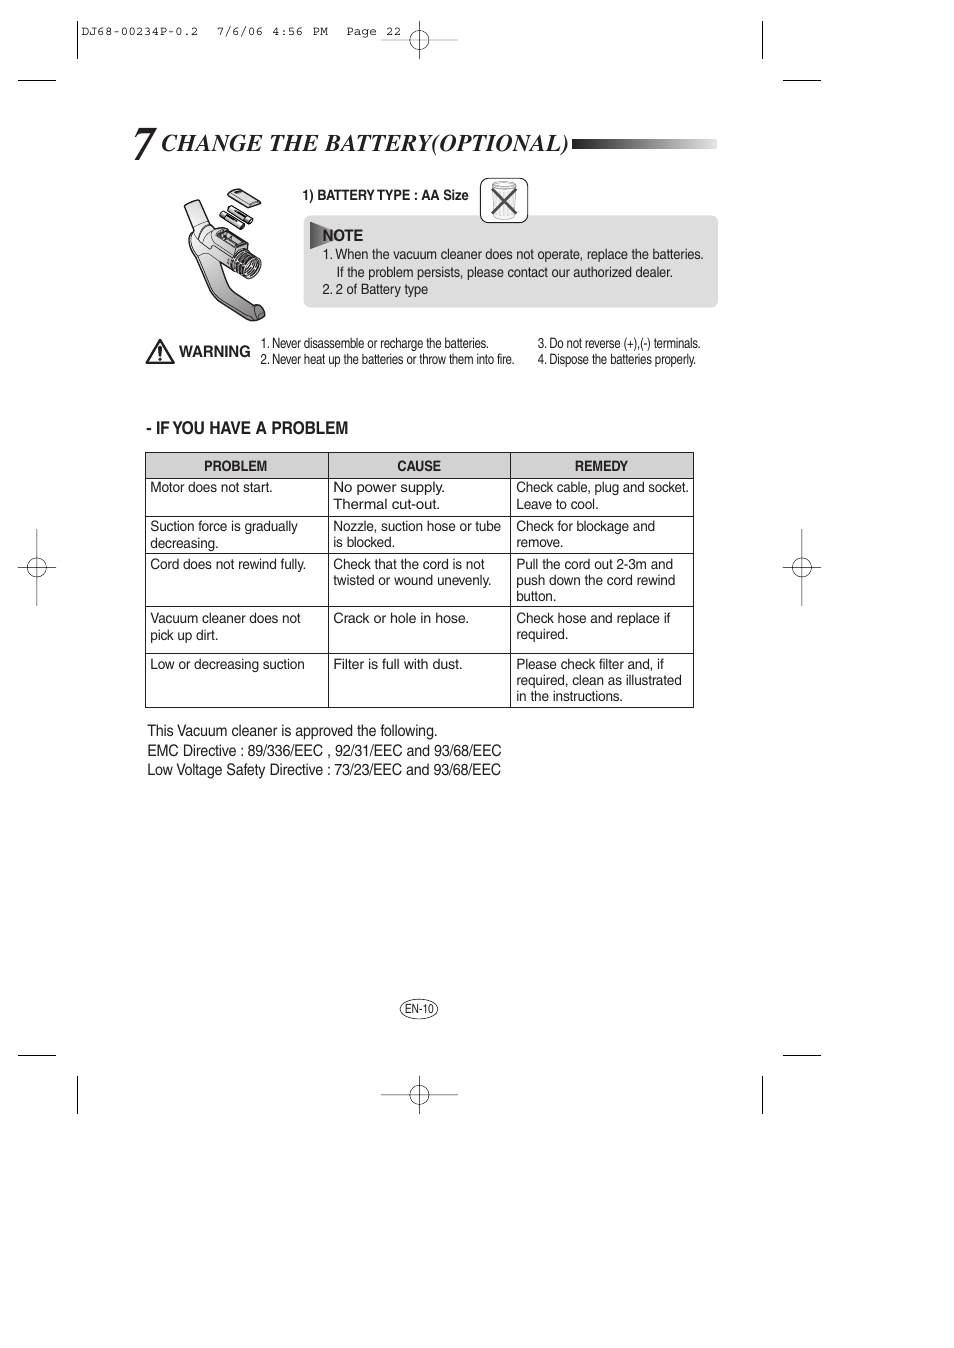 Change the battery(optional), If you have a problem | Samsung SC7840 User Manual | Page 22 / 56